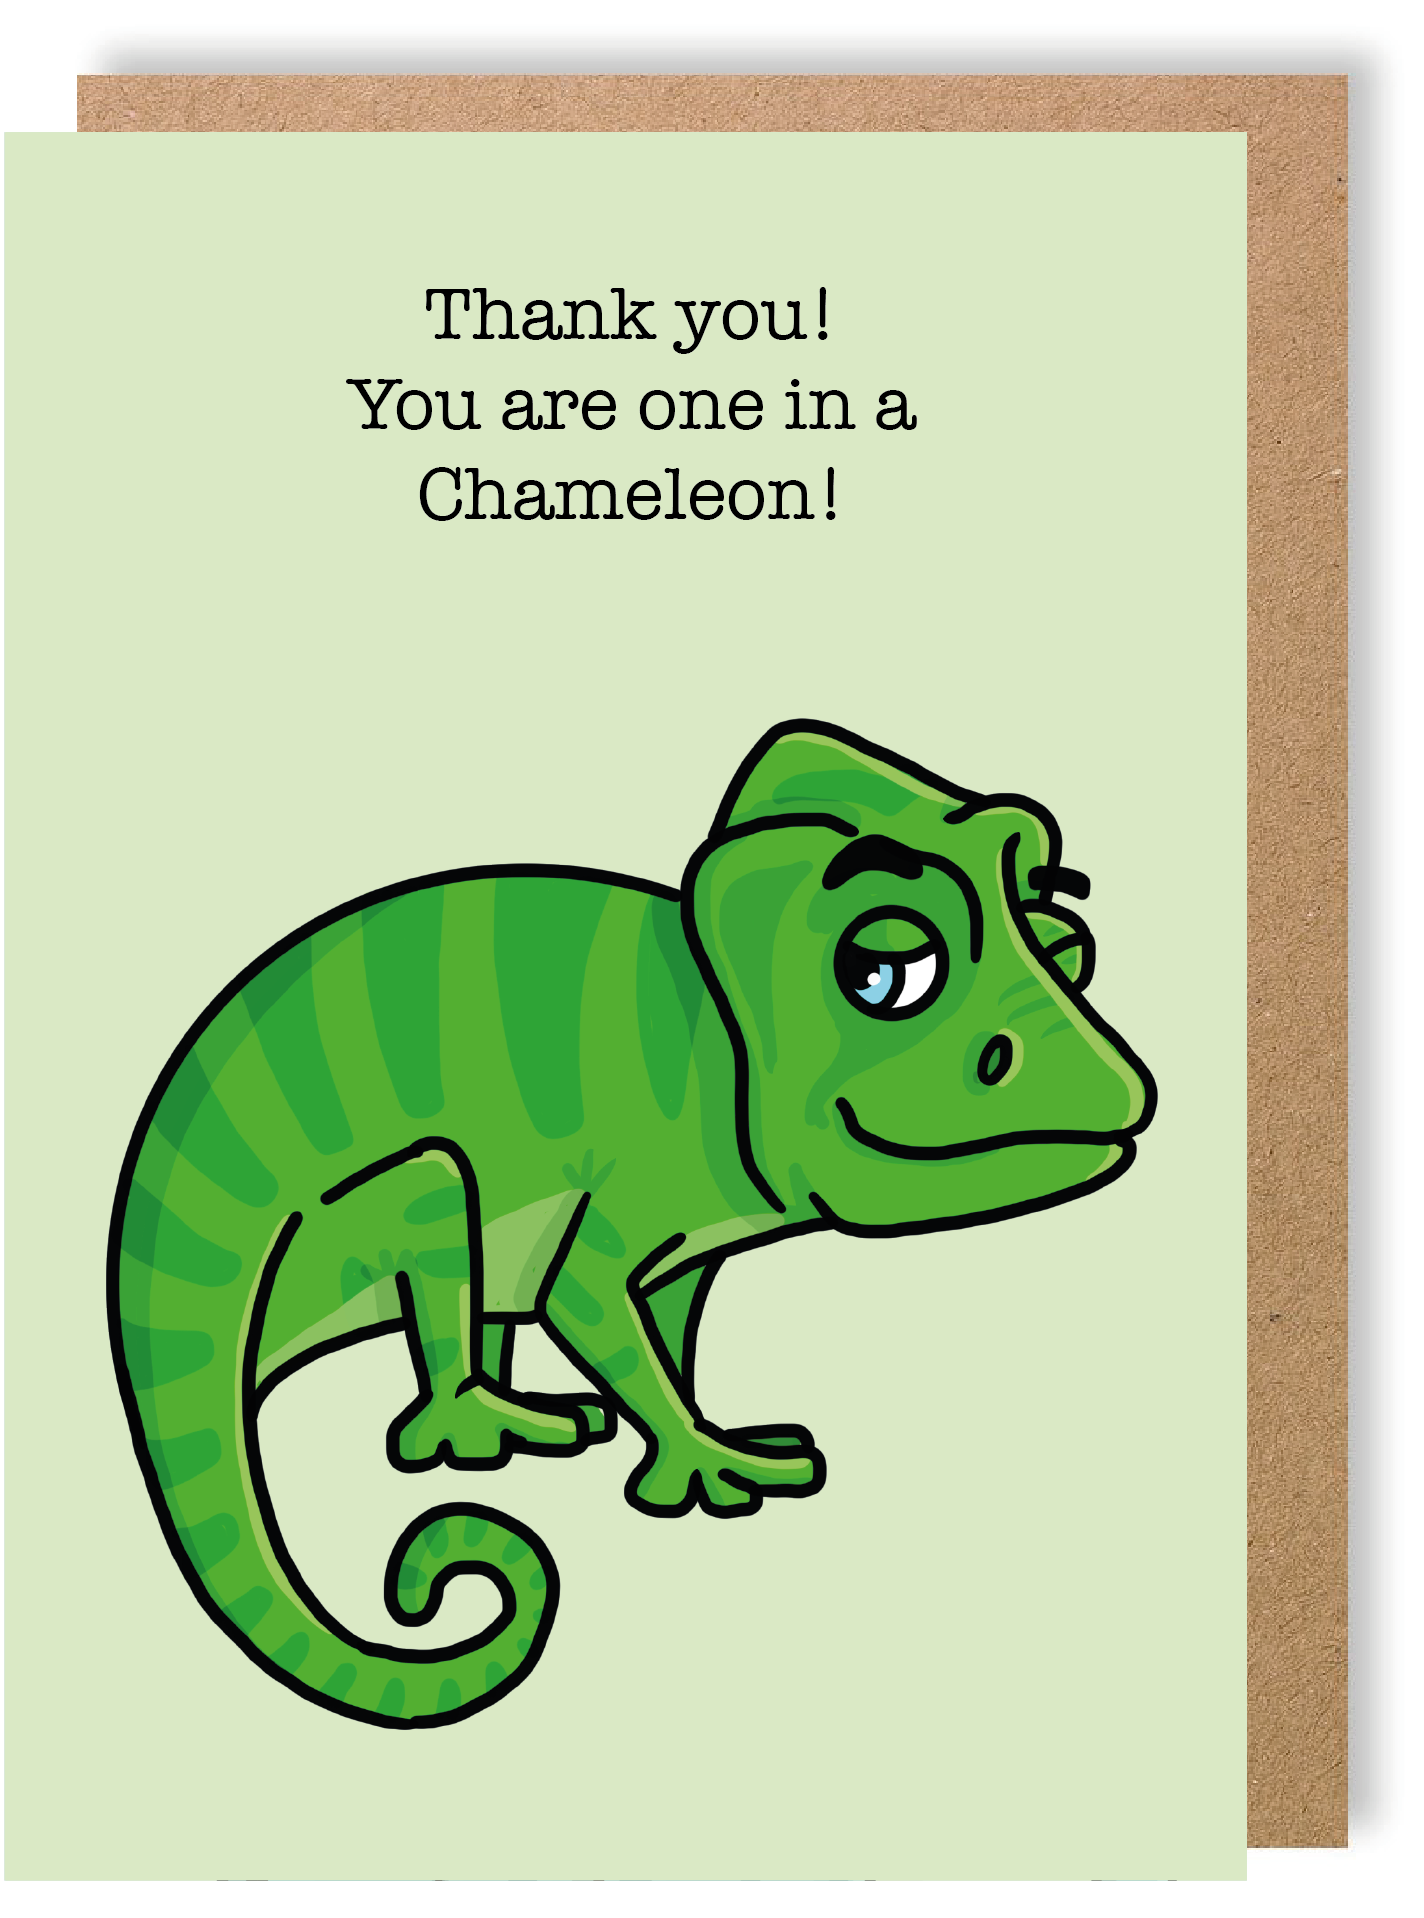 Thank You! You Are One In A Chameleon! - Chameleon - Greetings Card - LukeHorton Art